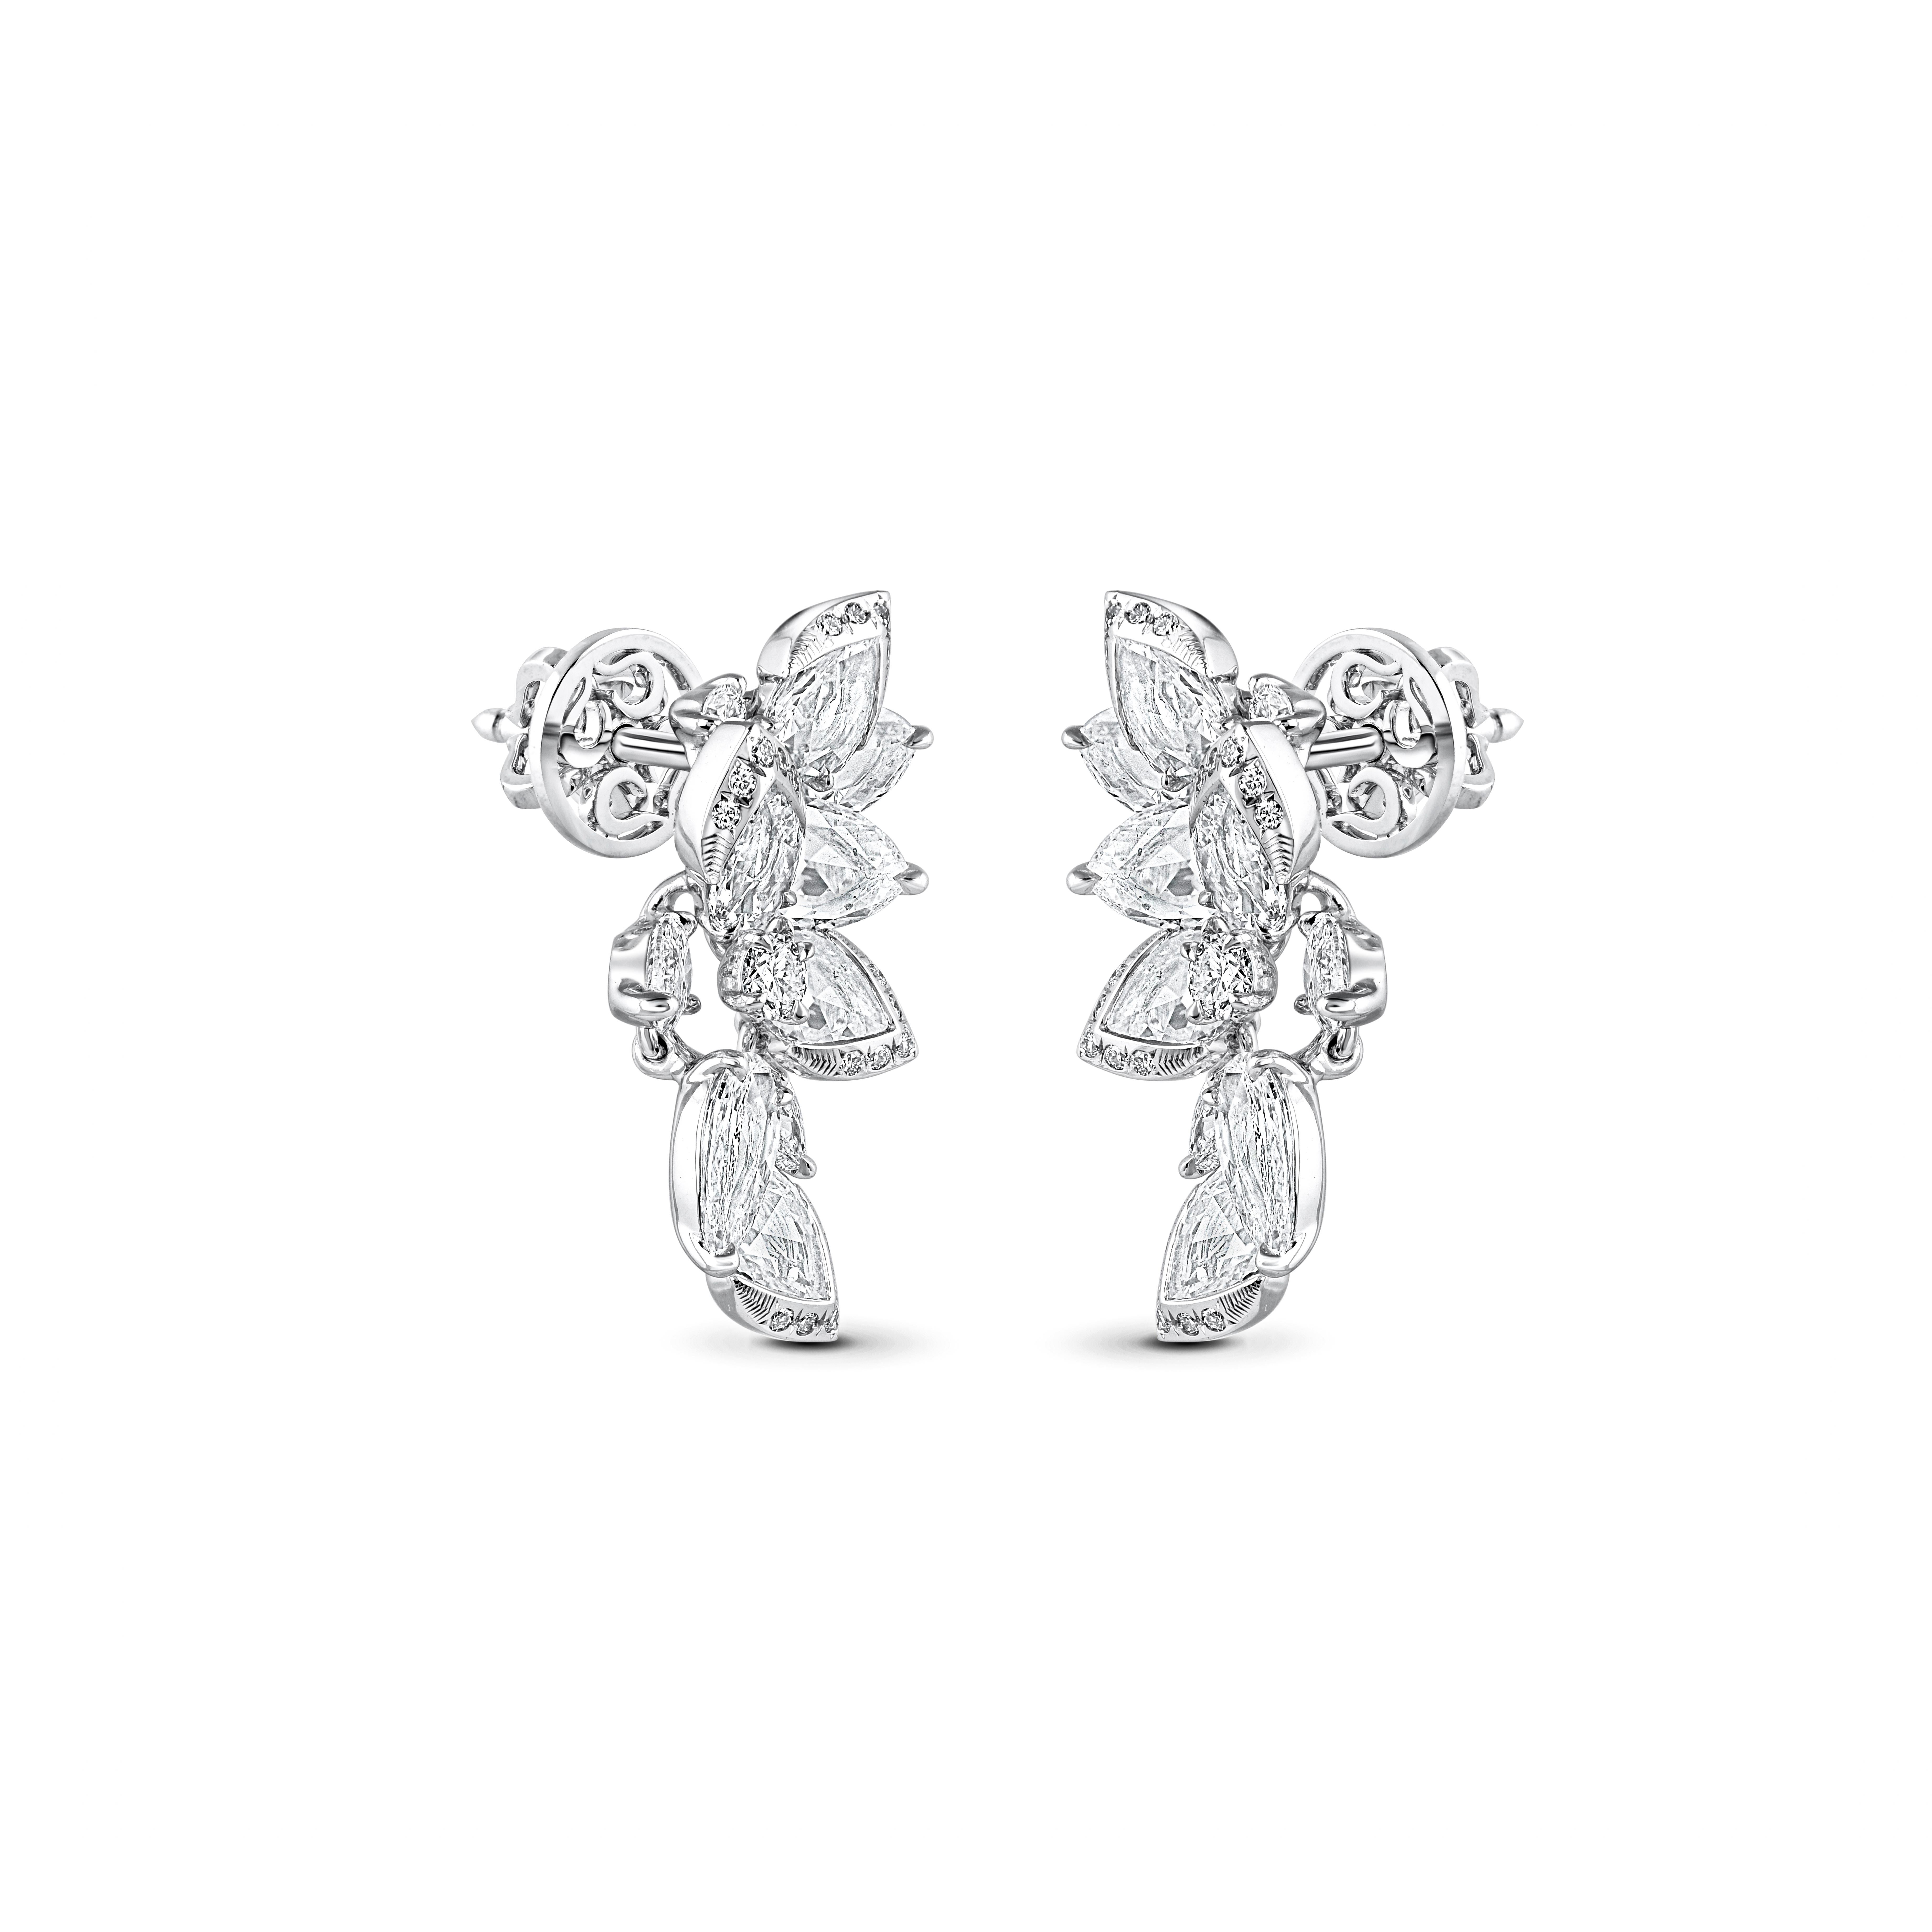 Inspired by the JOY of experiencing a gushing waterfall, these cascade earrings are studded with 4 pear-cut diamonds, 44 brilliant around-cut and 14 rose-cut pear diamonds dripping delicately. The diamonds are graded as F color and VS2 clarity. The